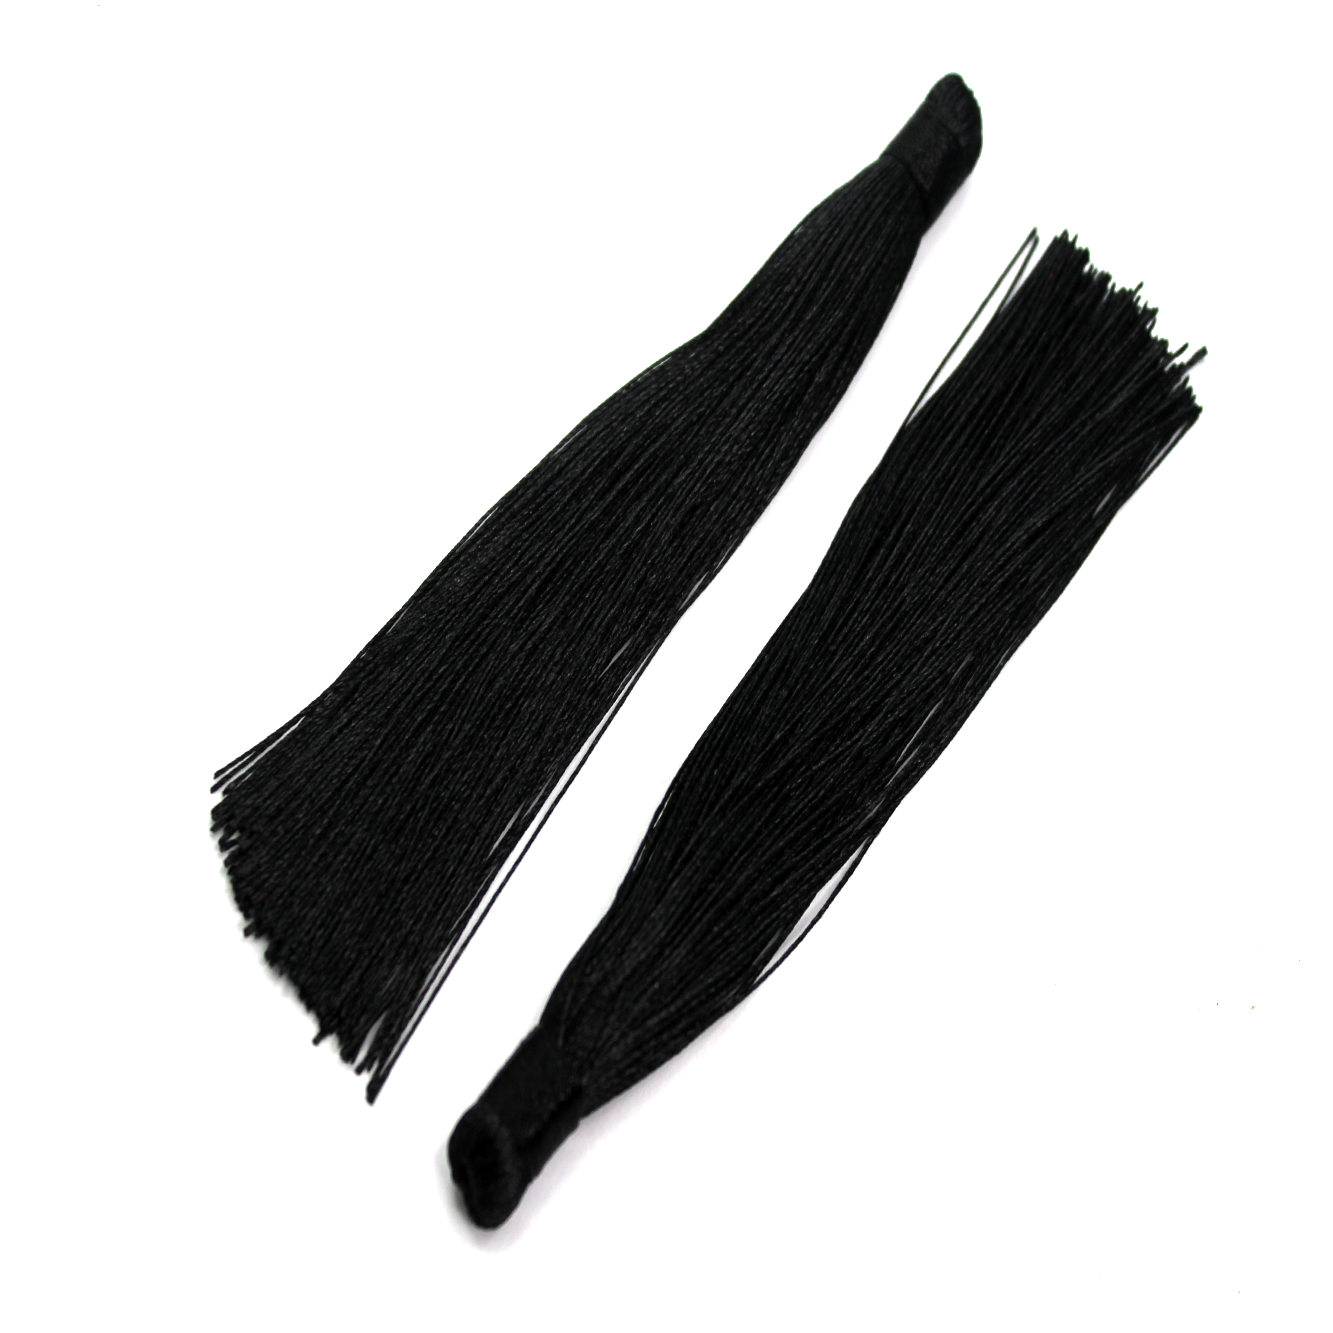 Tassels, Silk Thread, approx. 4.5 inch, 2pcs, Available in 7 colors